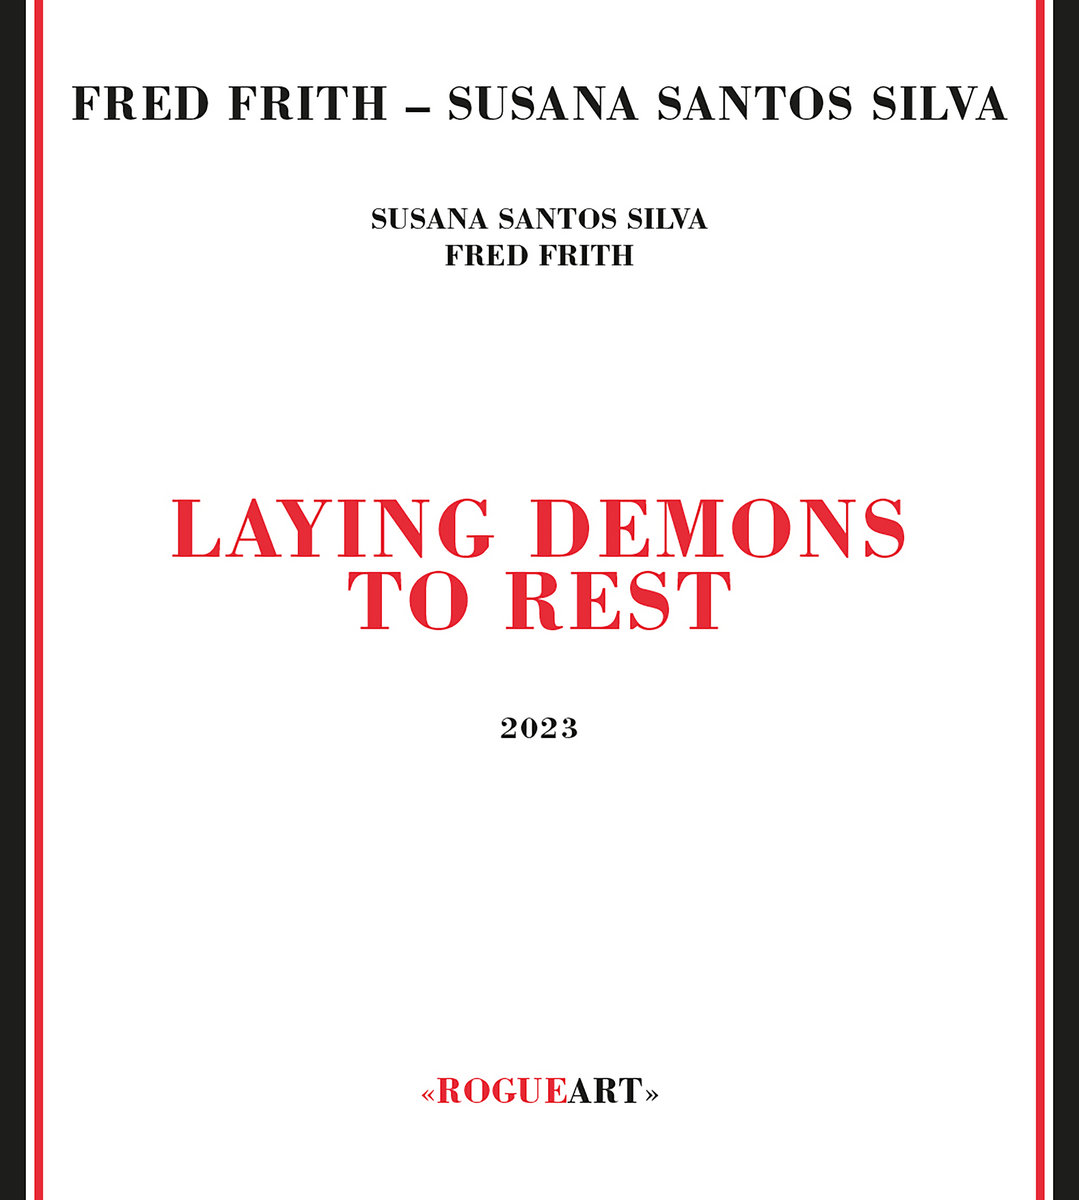 Fred Frith - Susana Santos Silva ? Laying Demons To Rest